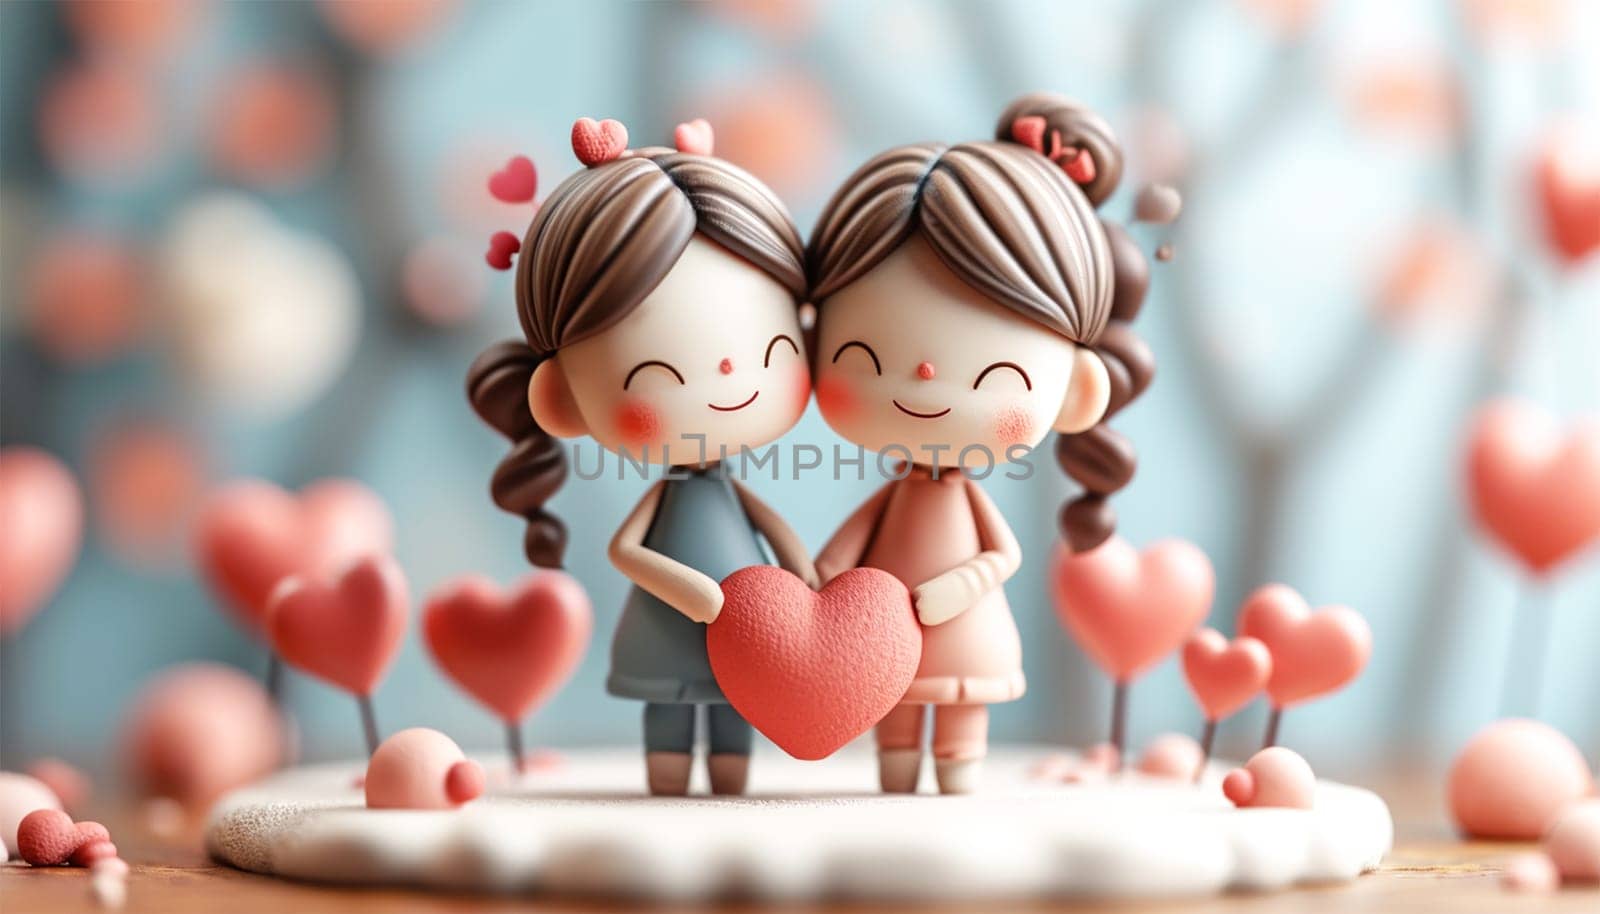 Two girls in Love,tenderness and romantic feeling concept. Happy Valentine's Day. Young couple in love holding a red heart, Cute animation copy space Valentine's Day